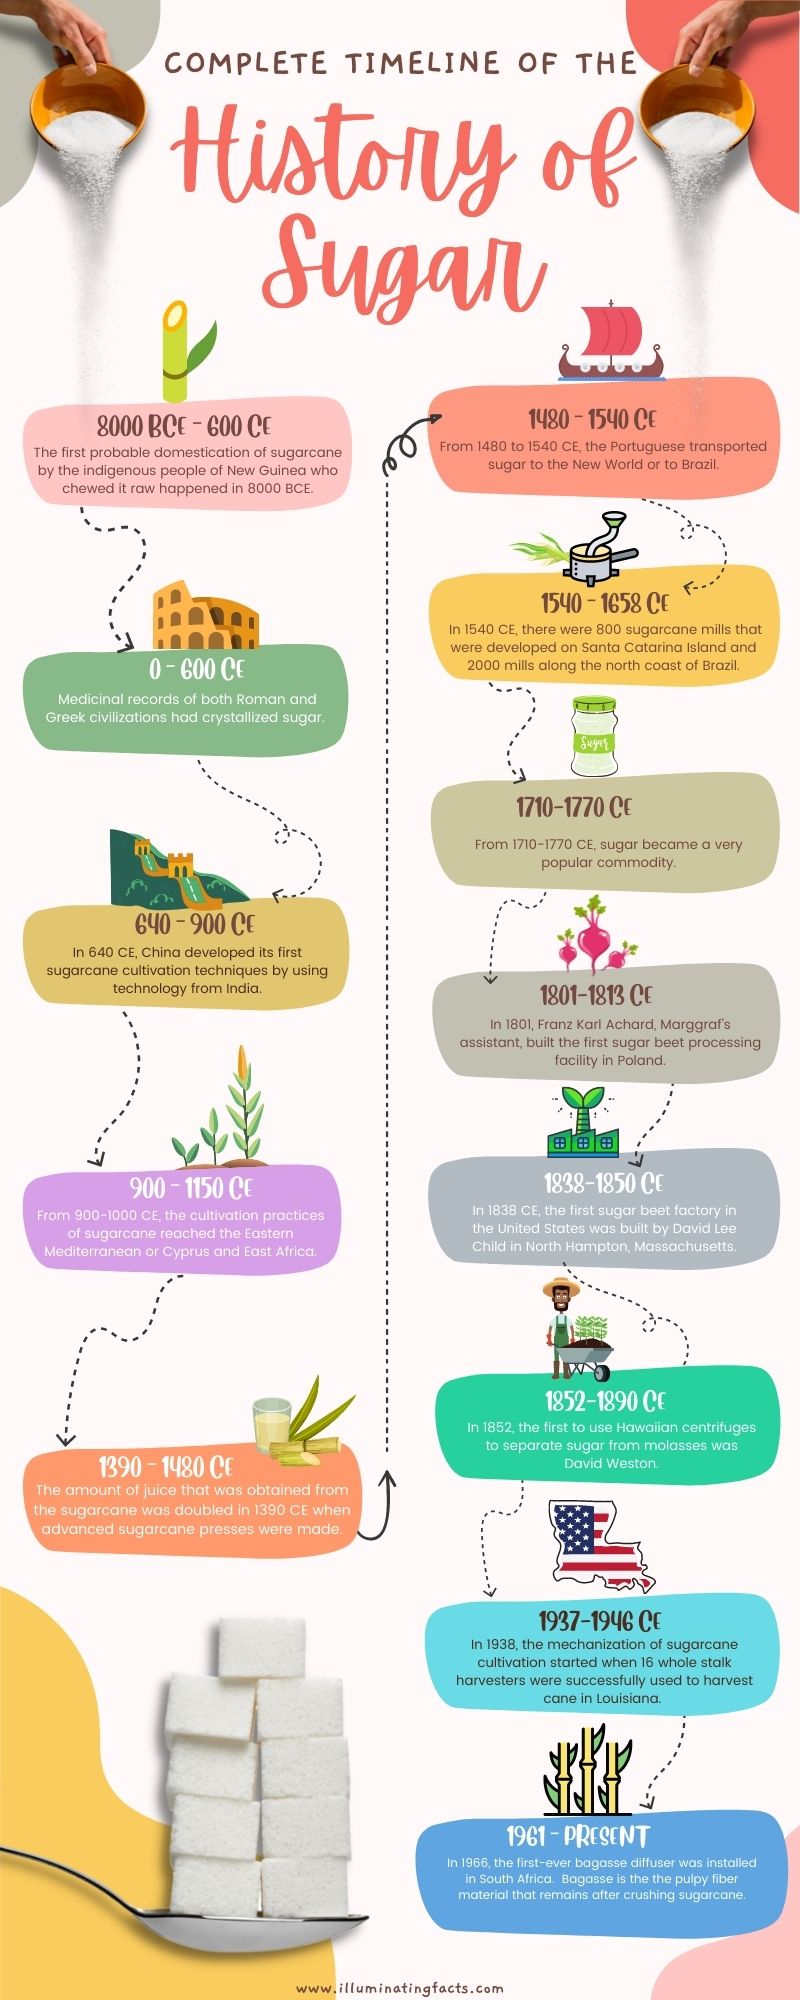 Complete Timeline of the History of Sugar